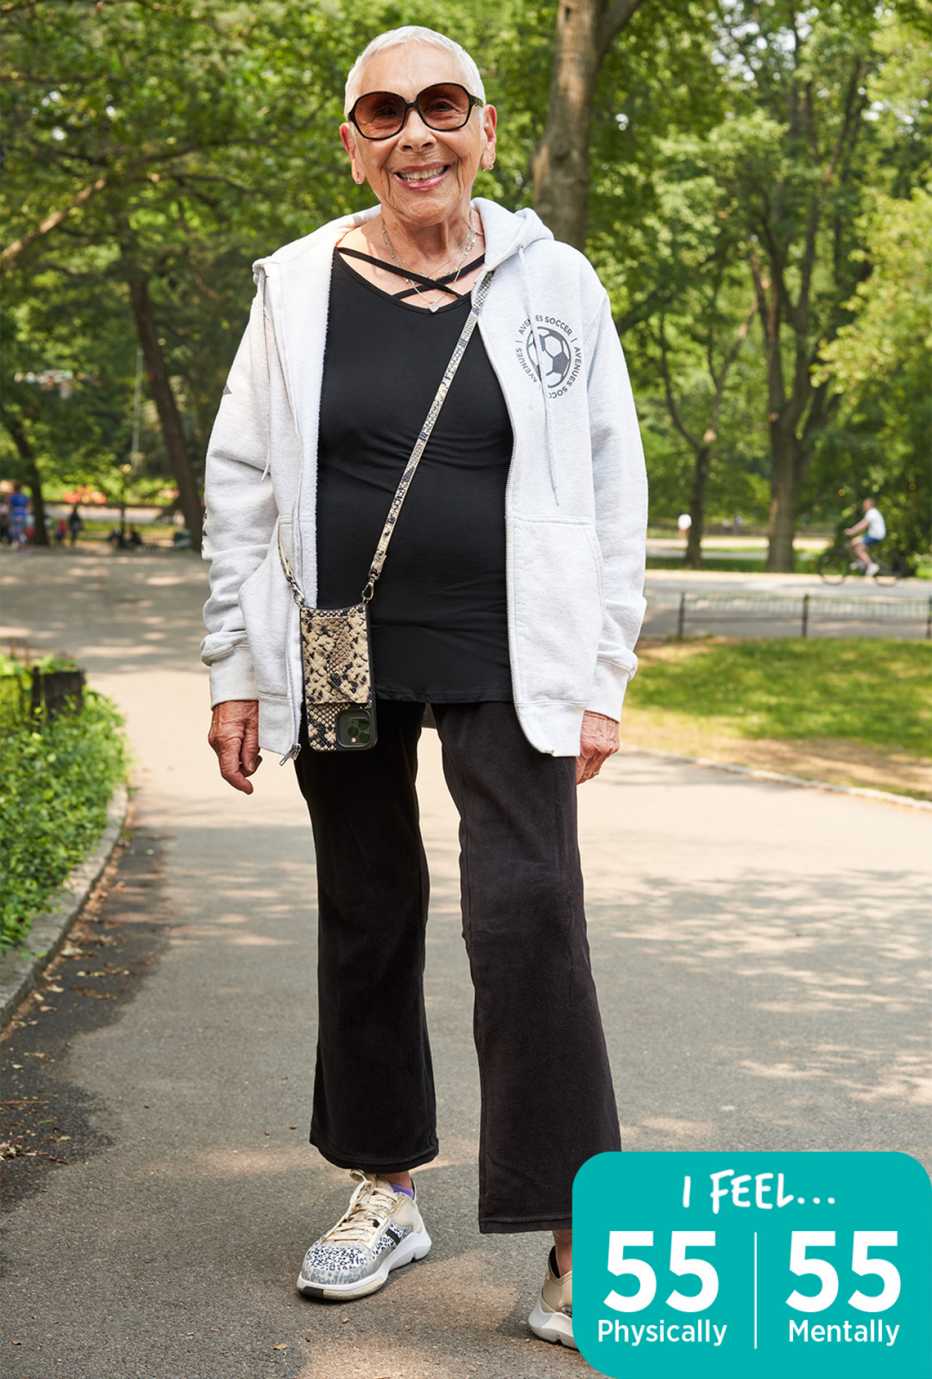 eighty year old marion margolis says she only feels fifty five years old both physically and mentally